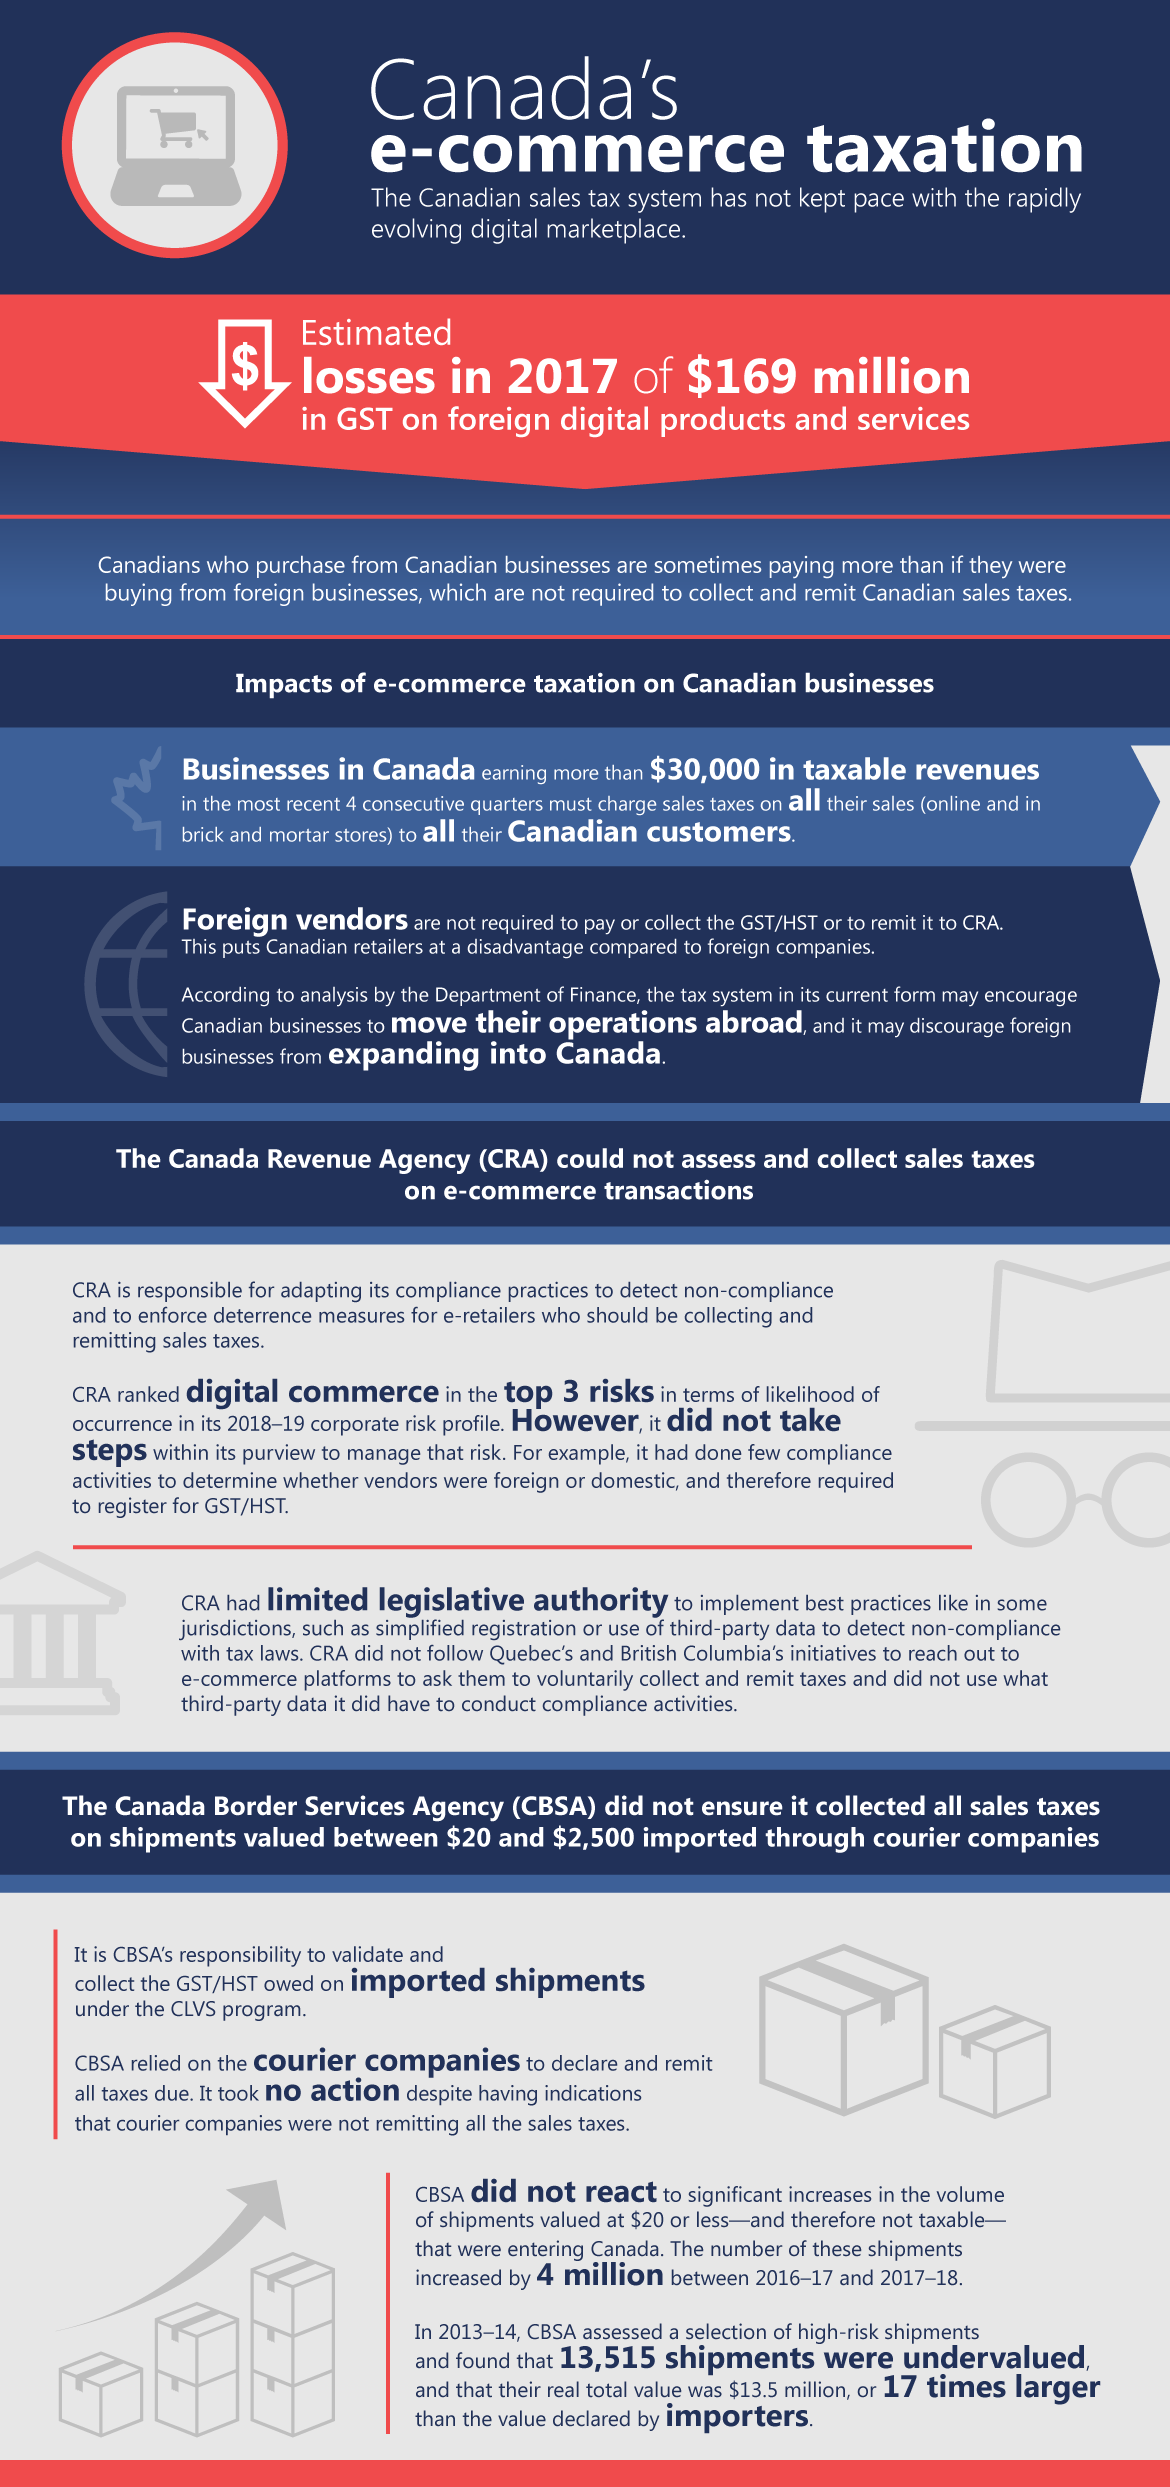 This infographic presents findings from the audit of taxation of E-commerce